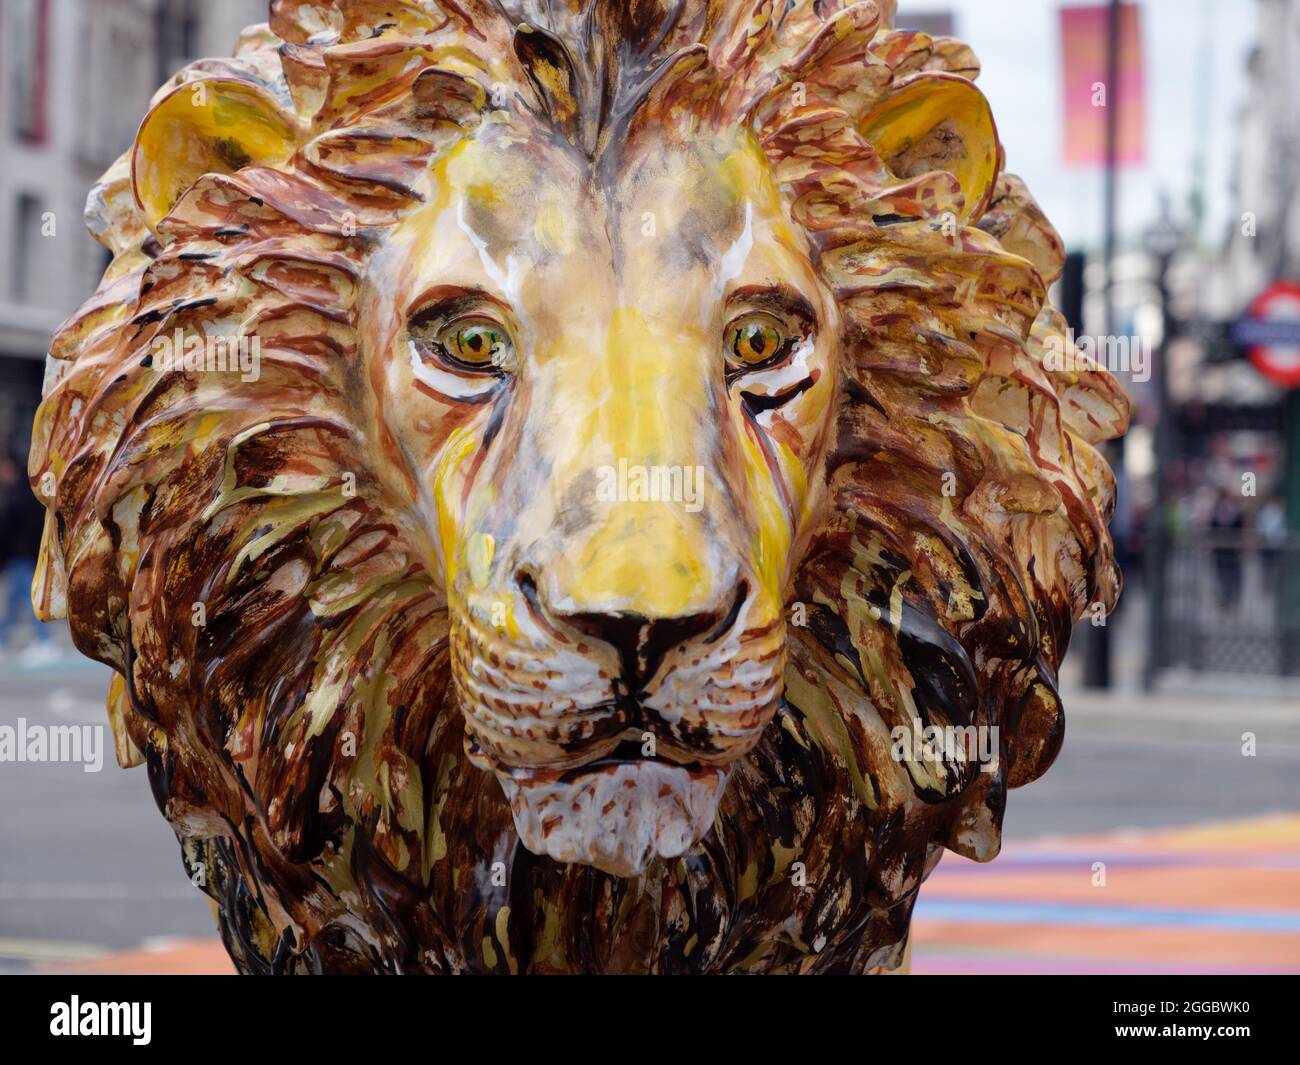 London, Greater London, England, August 24 2021: The London Pride Tusk Lion Trail, Not Lying Lion in Piccadilly Circus designed by Ronnie Wood. Stock Photo